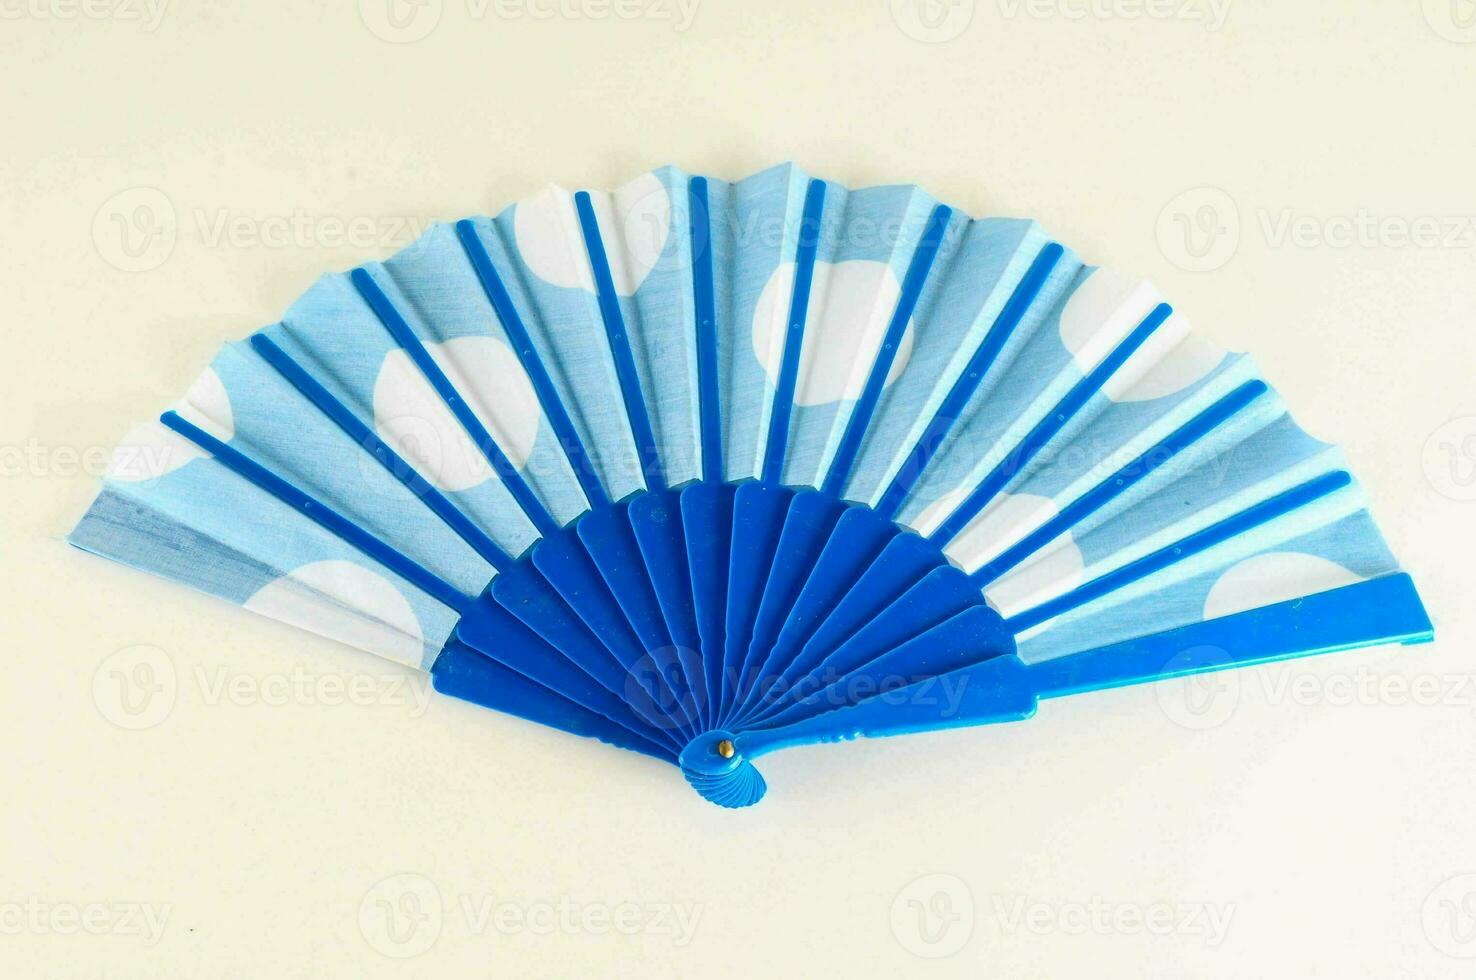 a blue and white polka dot fan with a handle photo